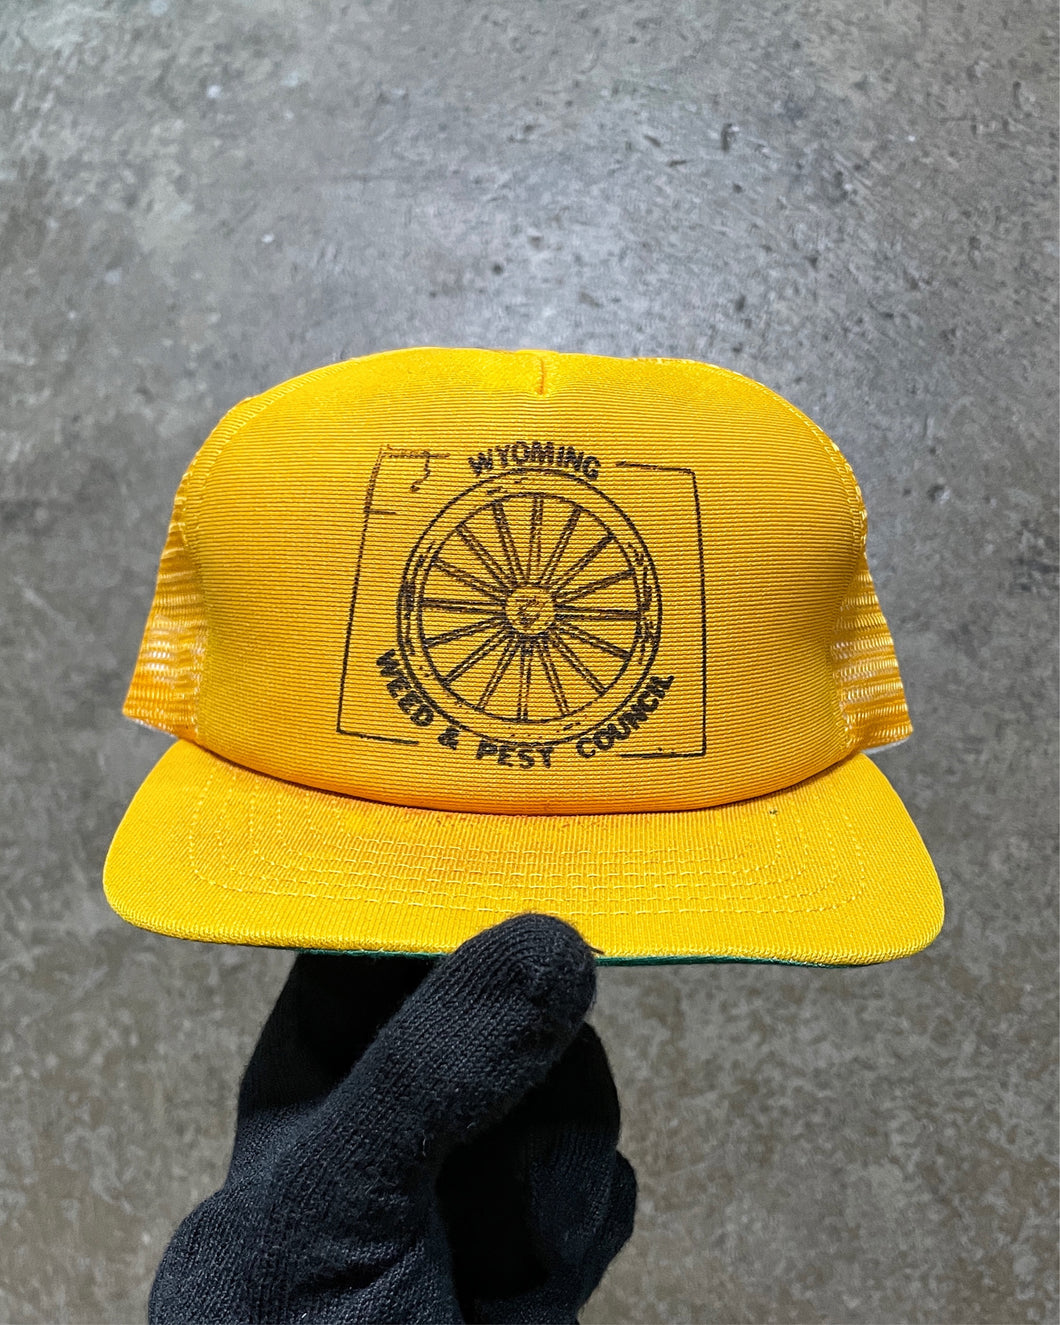 YELLOW “WYOMING WEED & PEST COUNCIL” TRUCKER HAT - 1990S